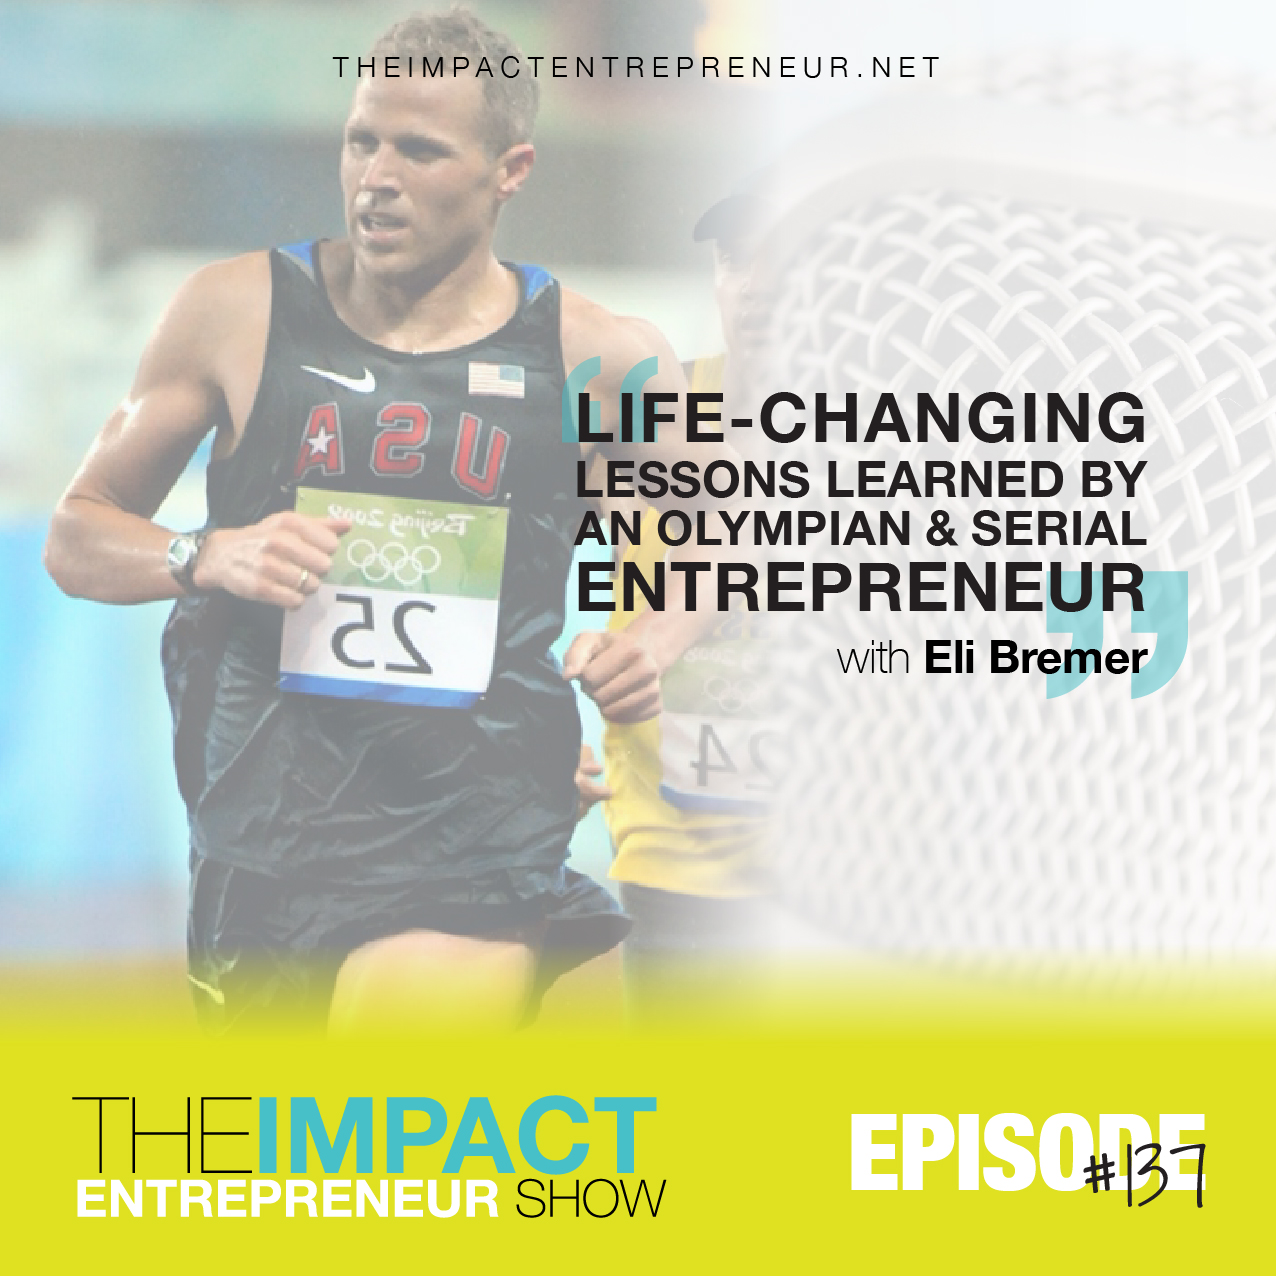 Ep. 137 - Life-Changing Lessons Learned by an Olympian & Serial Entrepreneur - with Eli Bremer